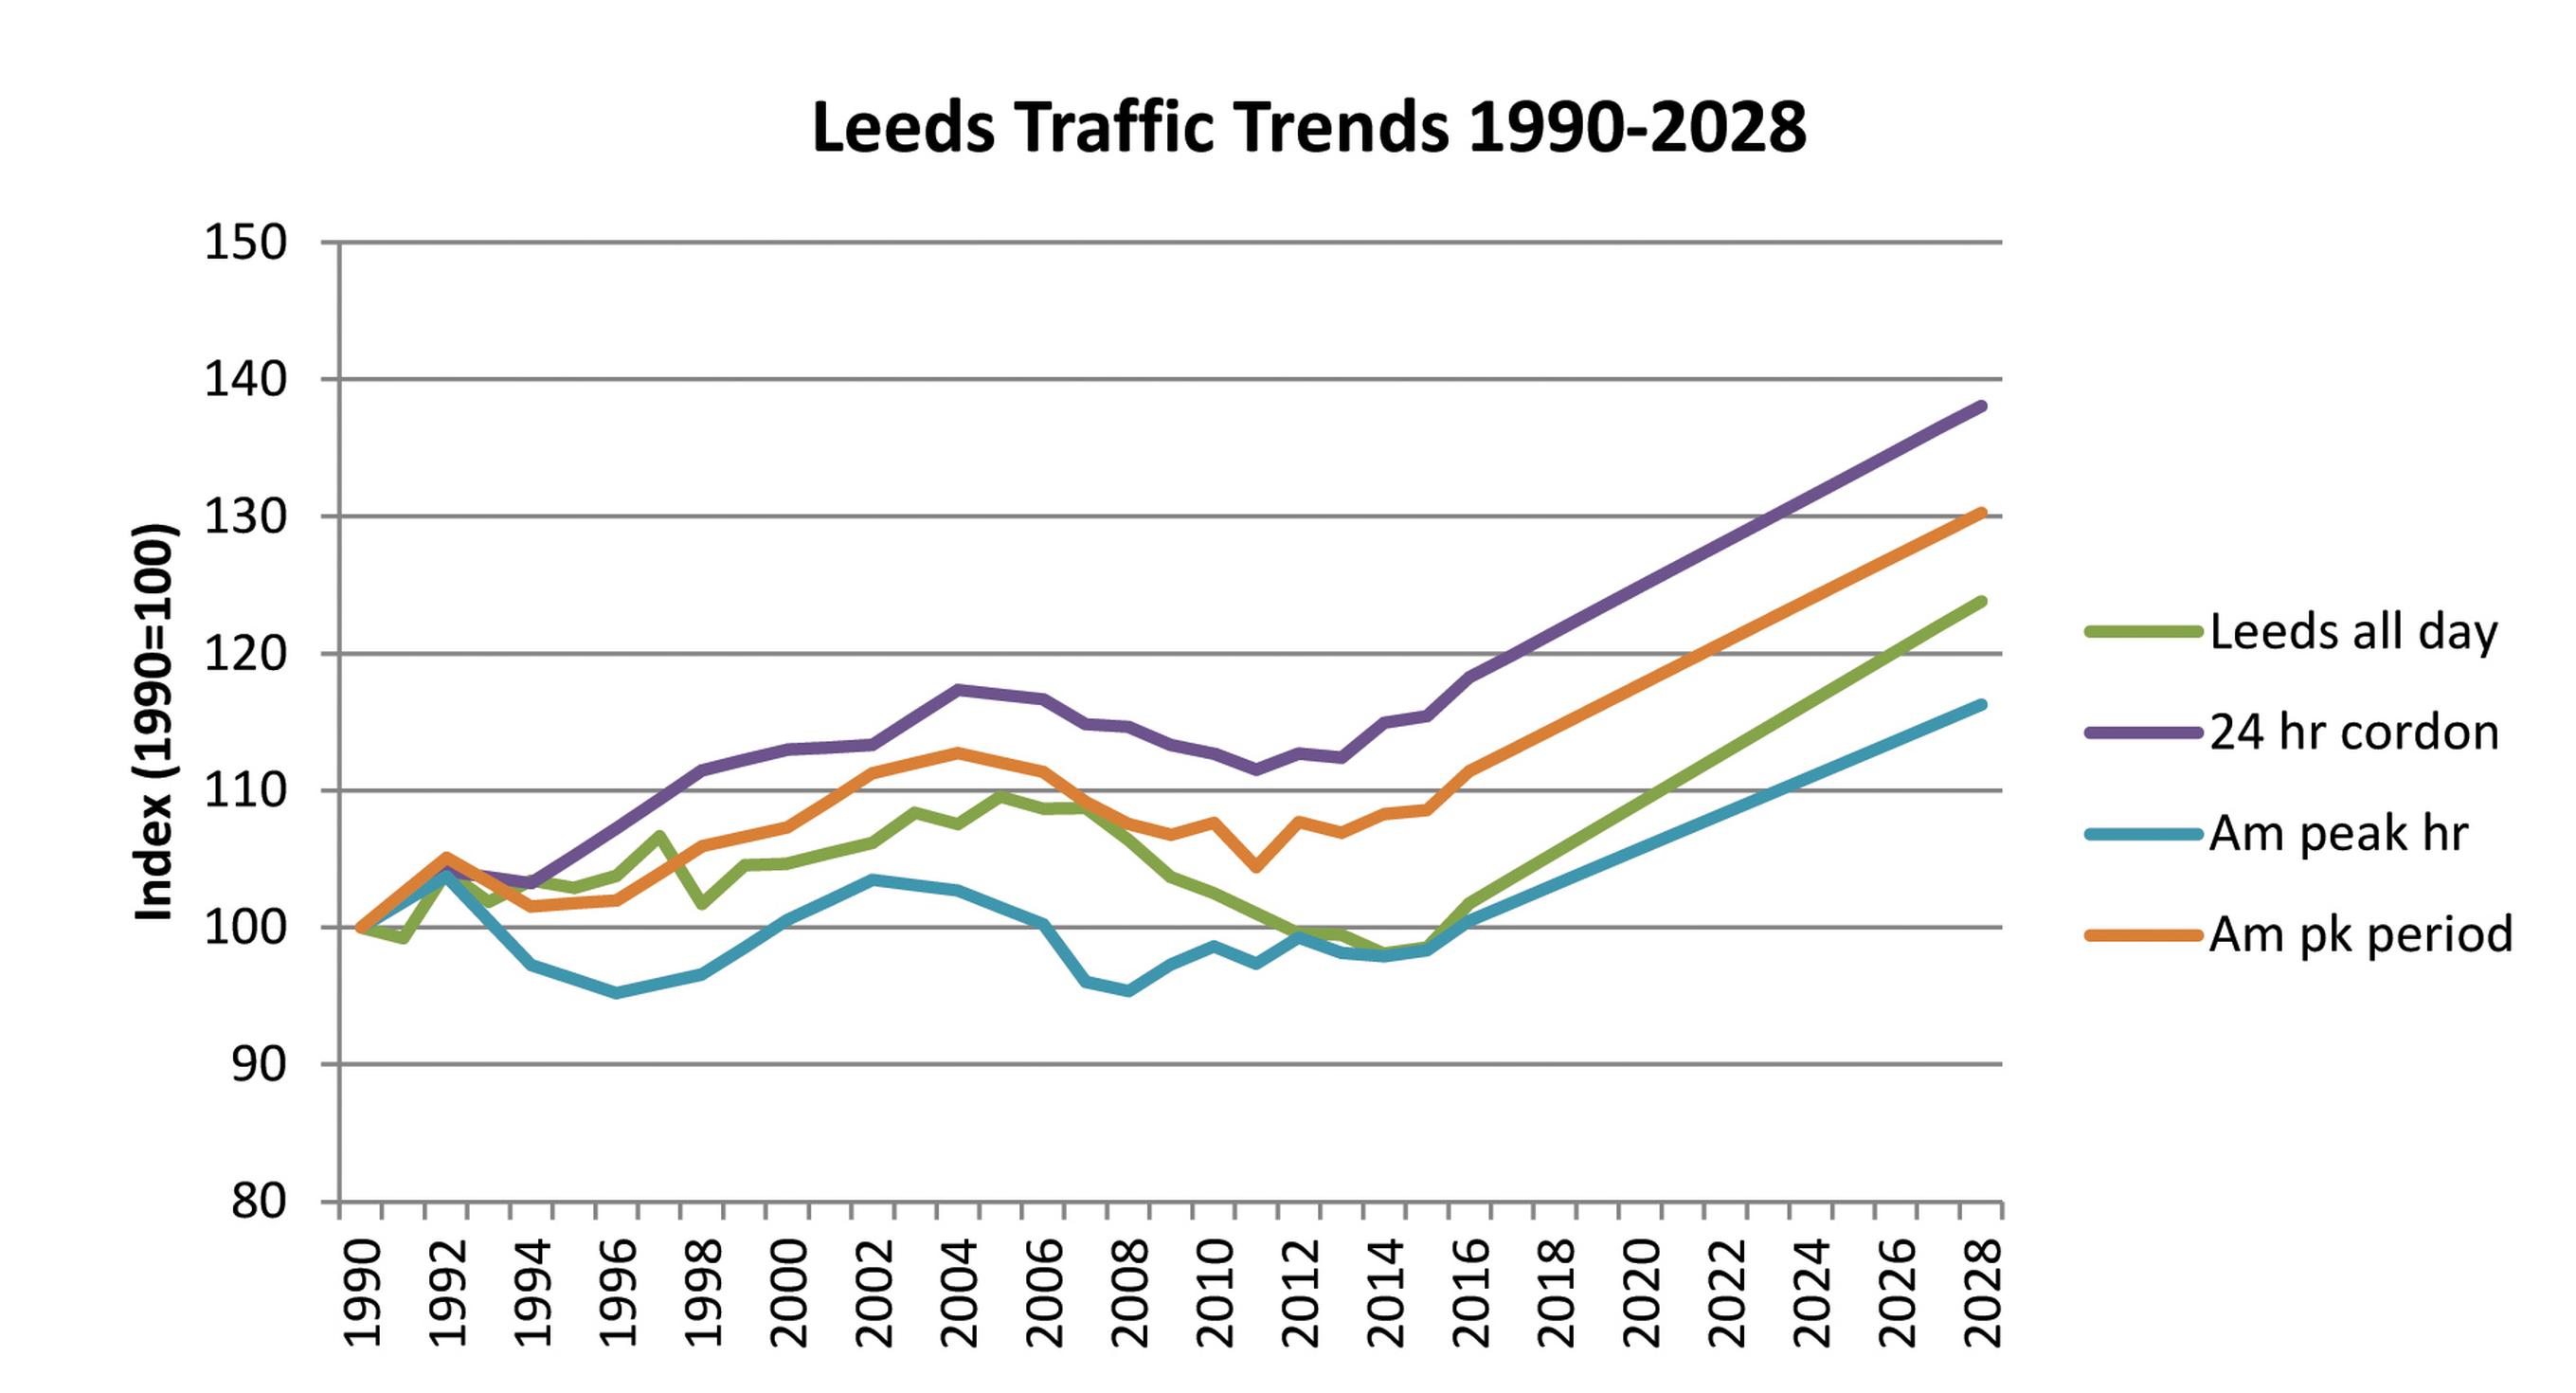 The DfT’s National Trip End Model predicts rapid traffic growth in Leeds, despite little growth in recent years. Greg Marsden questioned the projection